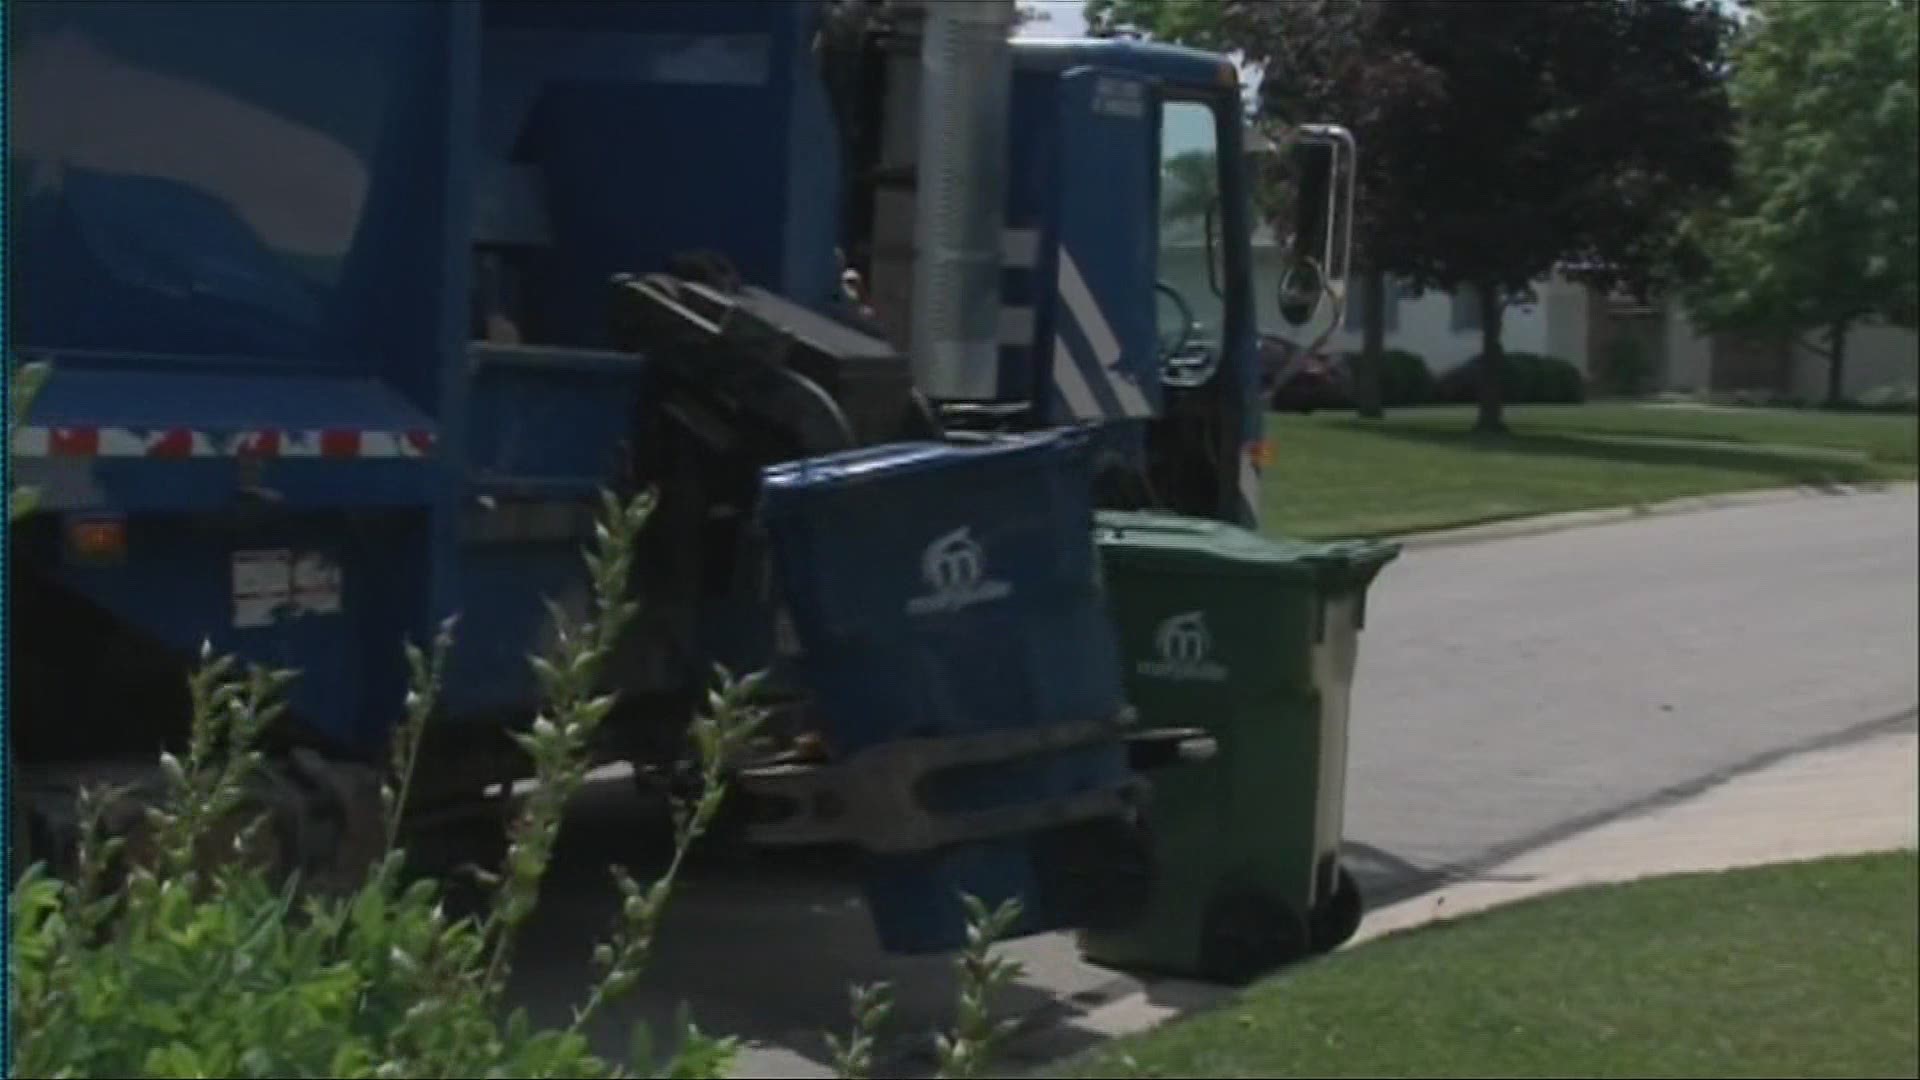 Neighborhood trash and recycling collectors are even busier now thanks to the pandemic. They need your help in keeping things running smoothly.